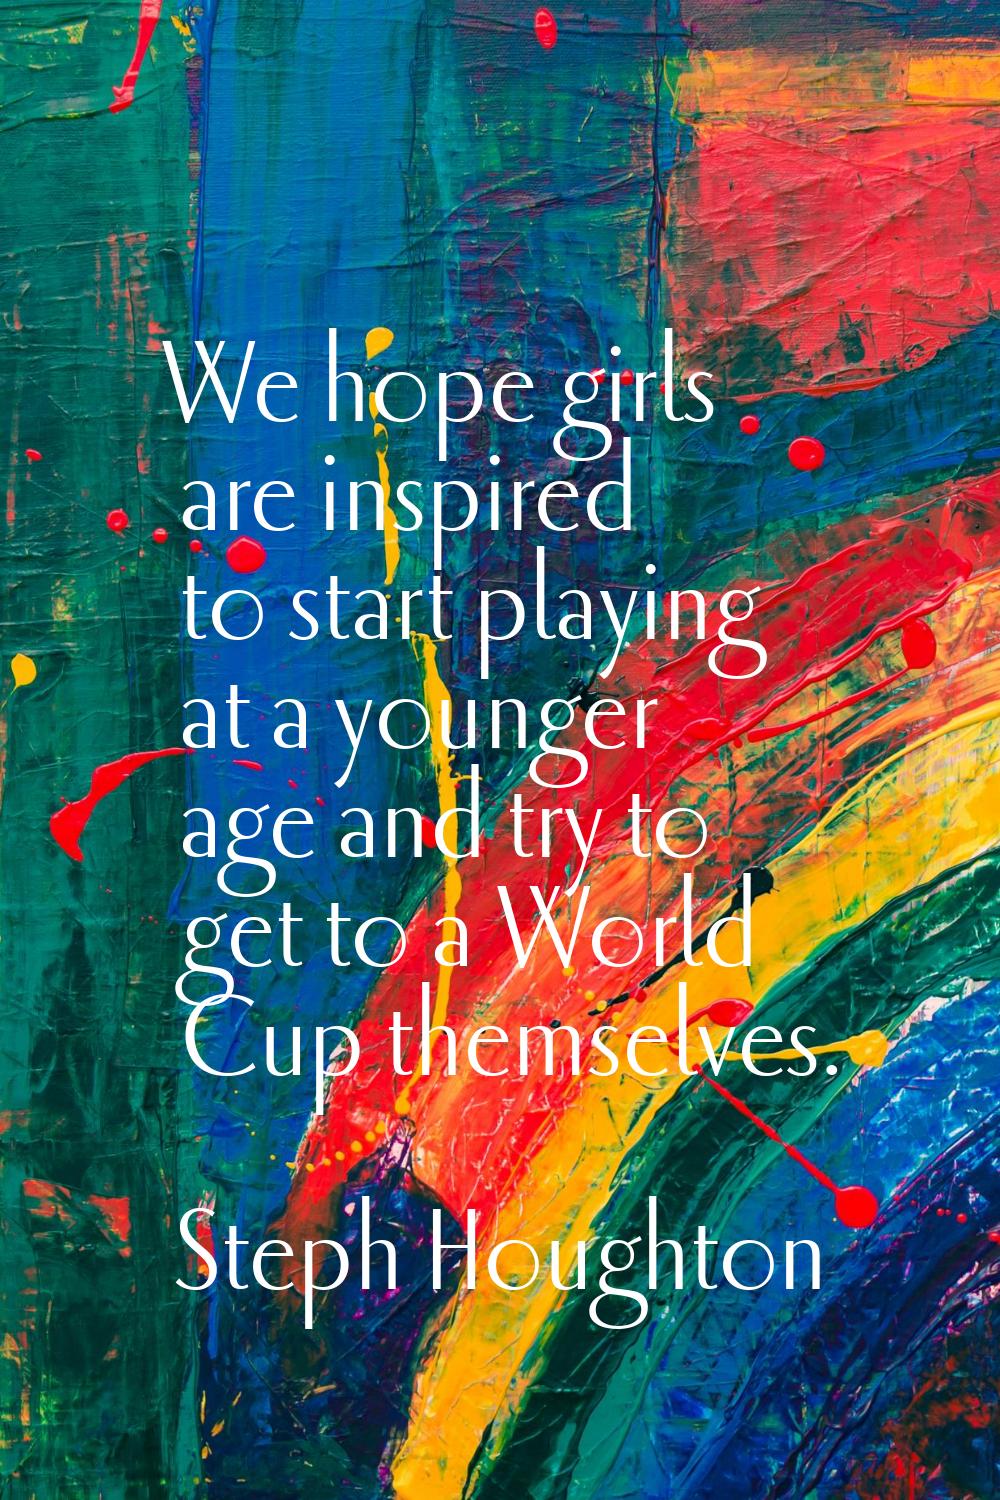 We hope girls are inspired to start playing at a younger age and try to get to a World Cup themselv